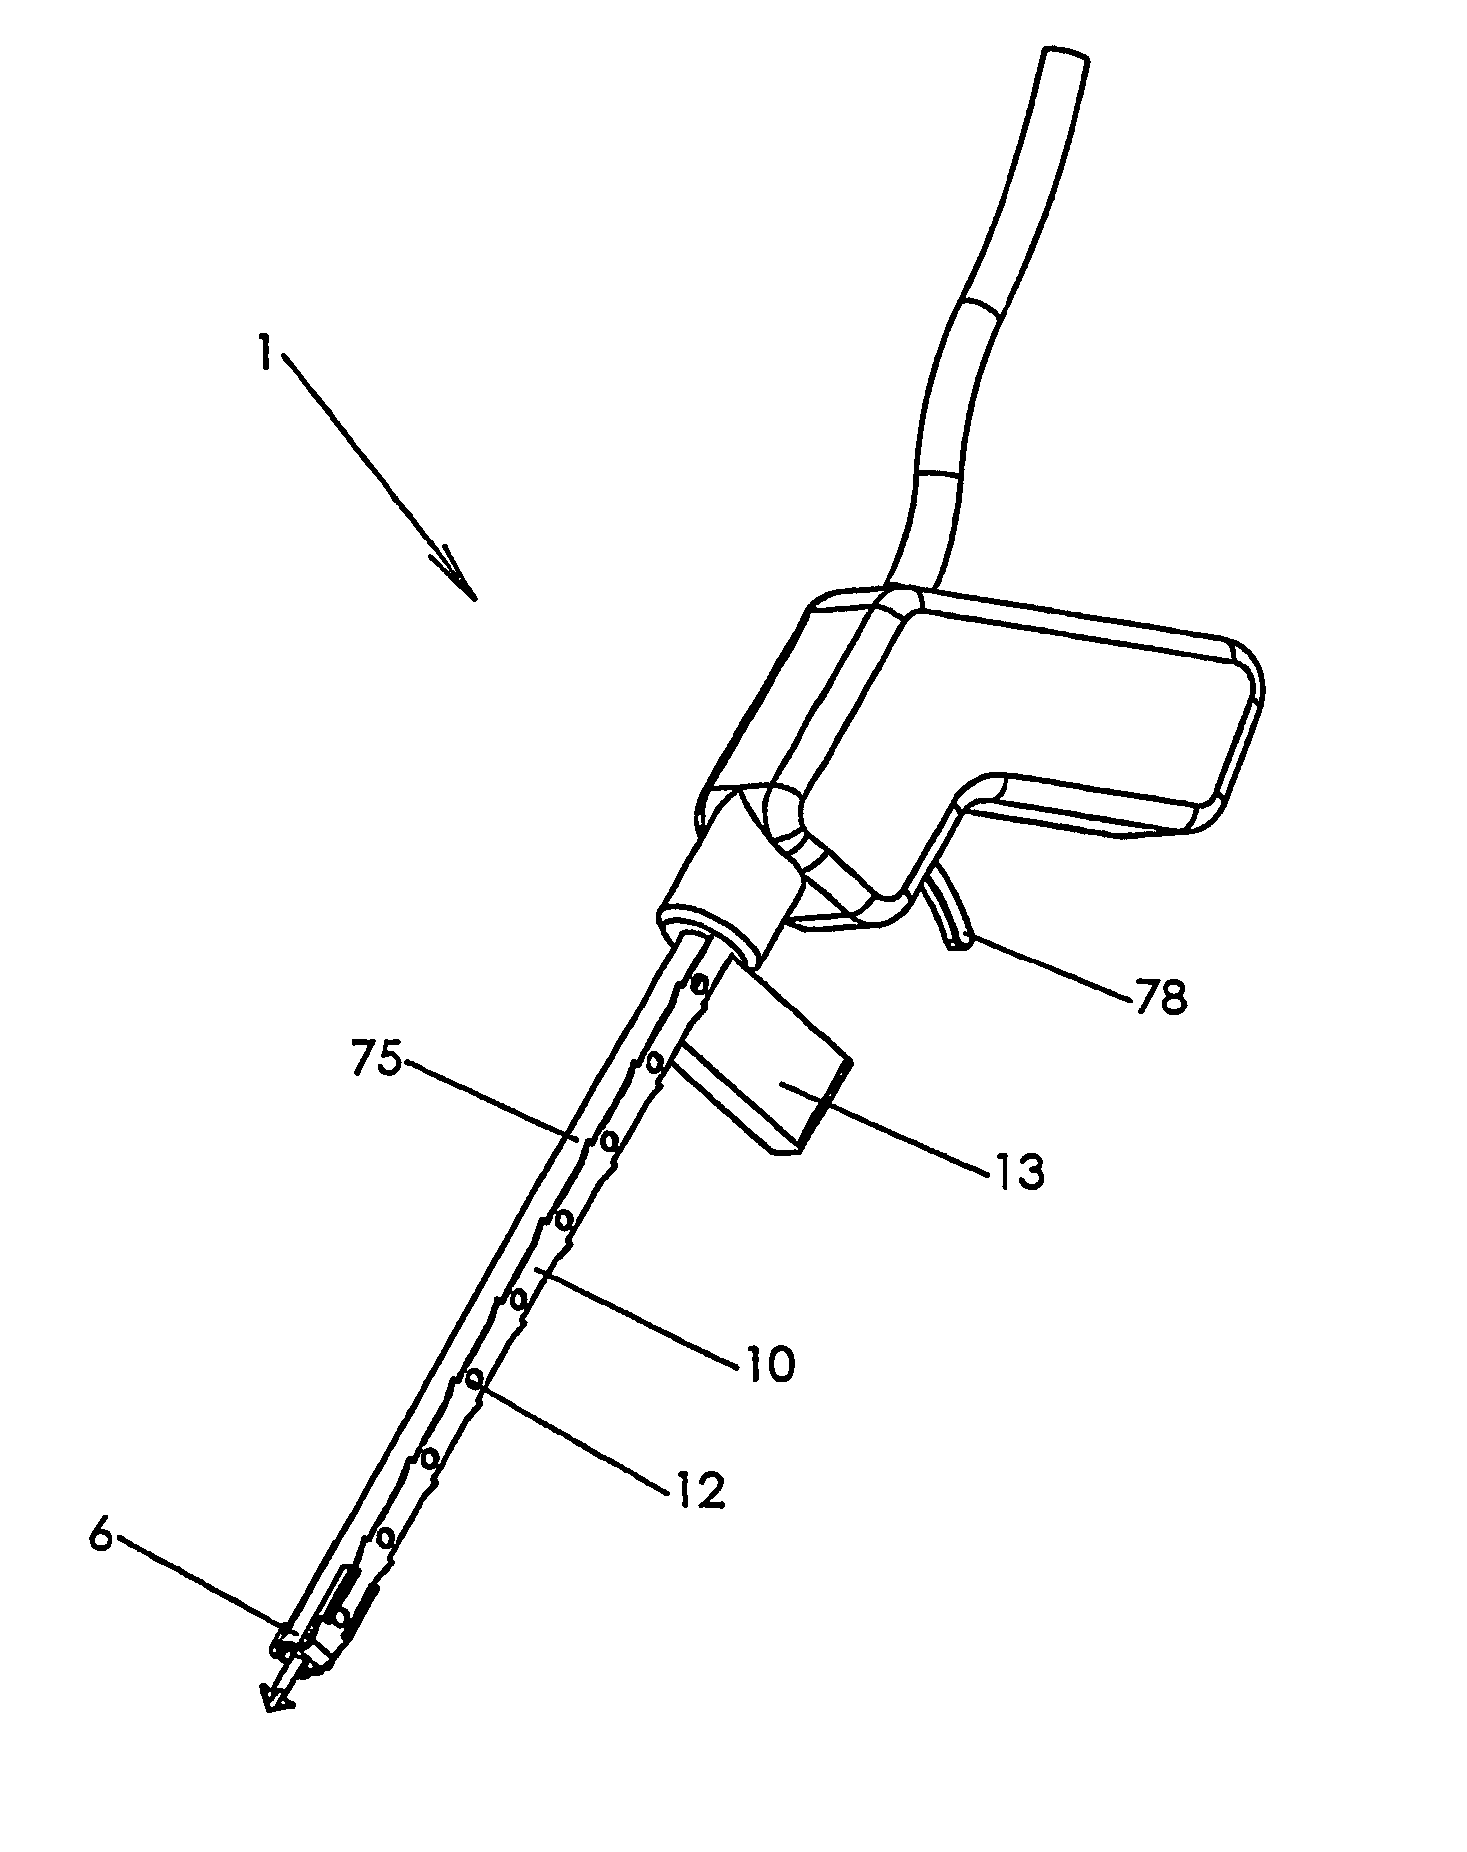 Surgical fasteners and devices for surgical fastening